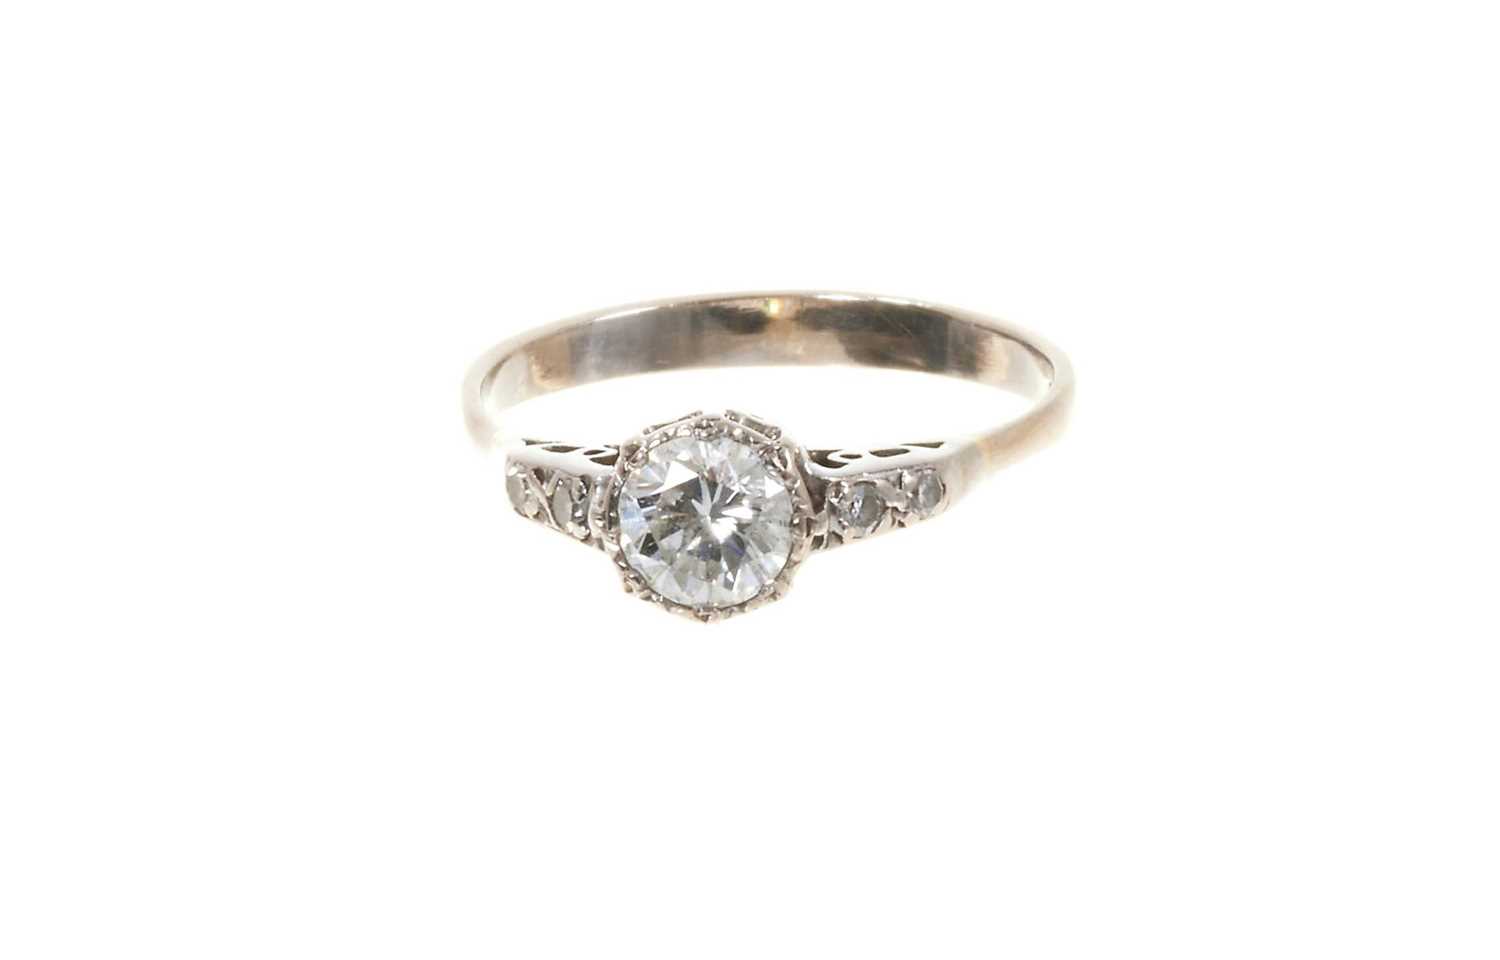 Diamond single stone ring with a round brilliant cut diamond estimated to weigh approximately 0.50ct